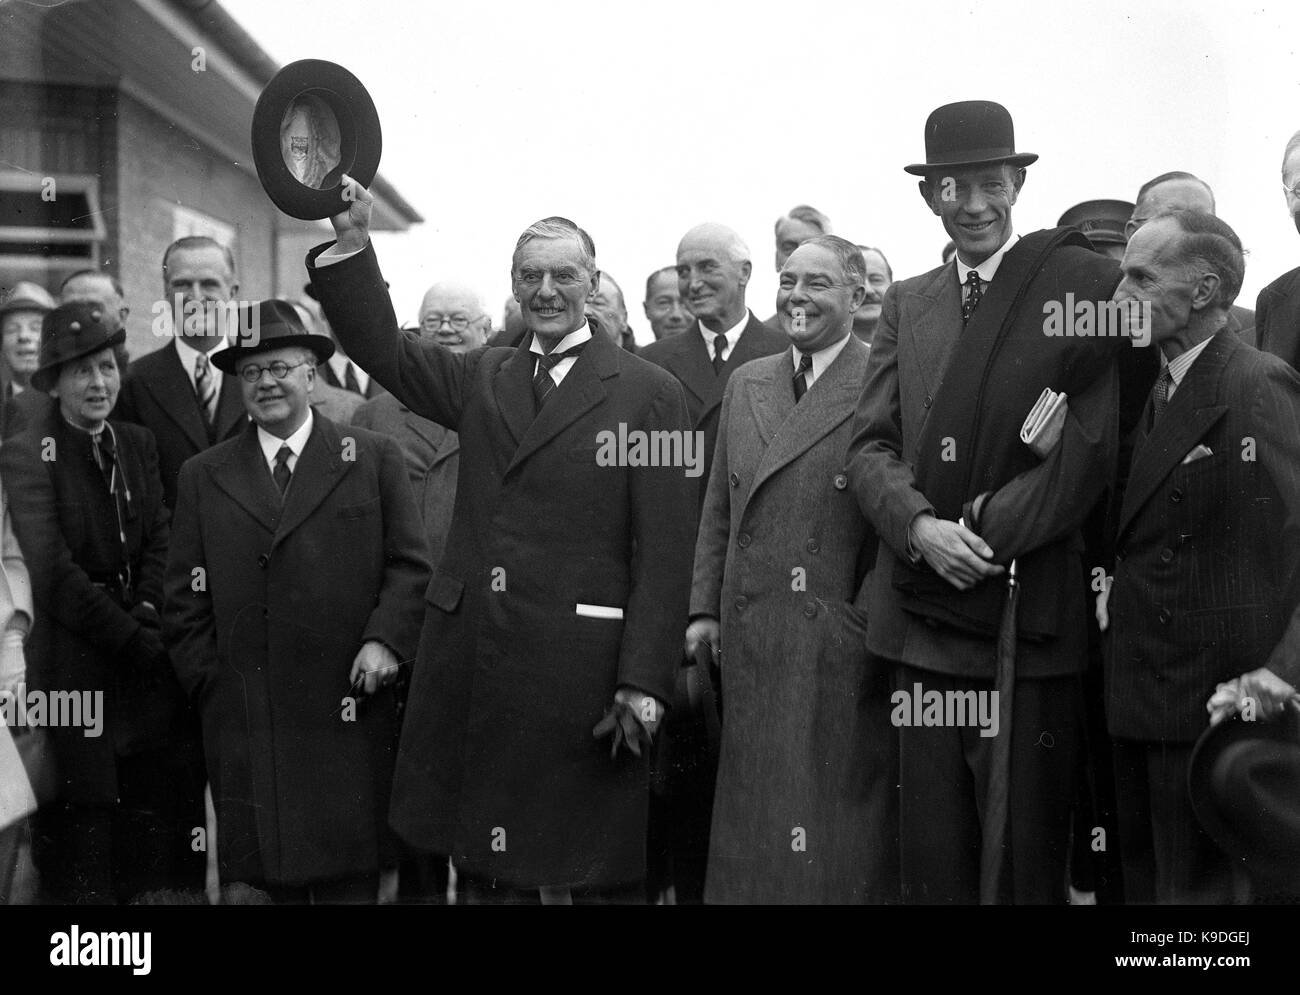 British prime minister Neville Chamberlain leaving for his summit meeting with the German Chancellor Adolf Hitler in Munich. Prime Minster Chamberlain returned with the paper signed by Hitler and himself sticking out of his pocket after declaring to the waiting crowd ' Peace in our time ' 3rd October 1938. With him are Sir Kingsley Wood, Leslie Hore-Belisha, Lord Halifax. Stock Photo